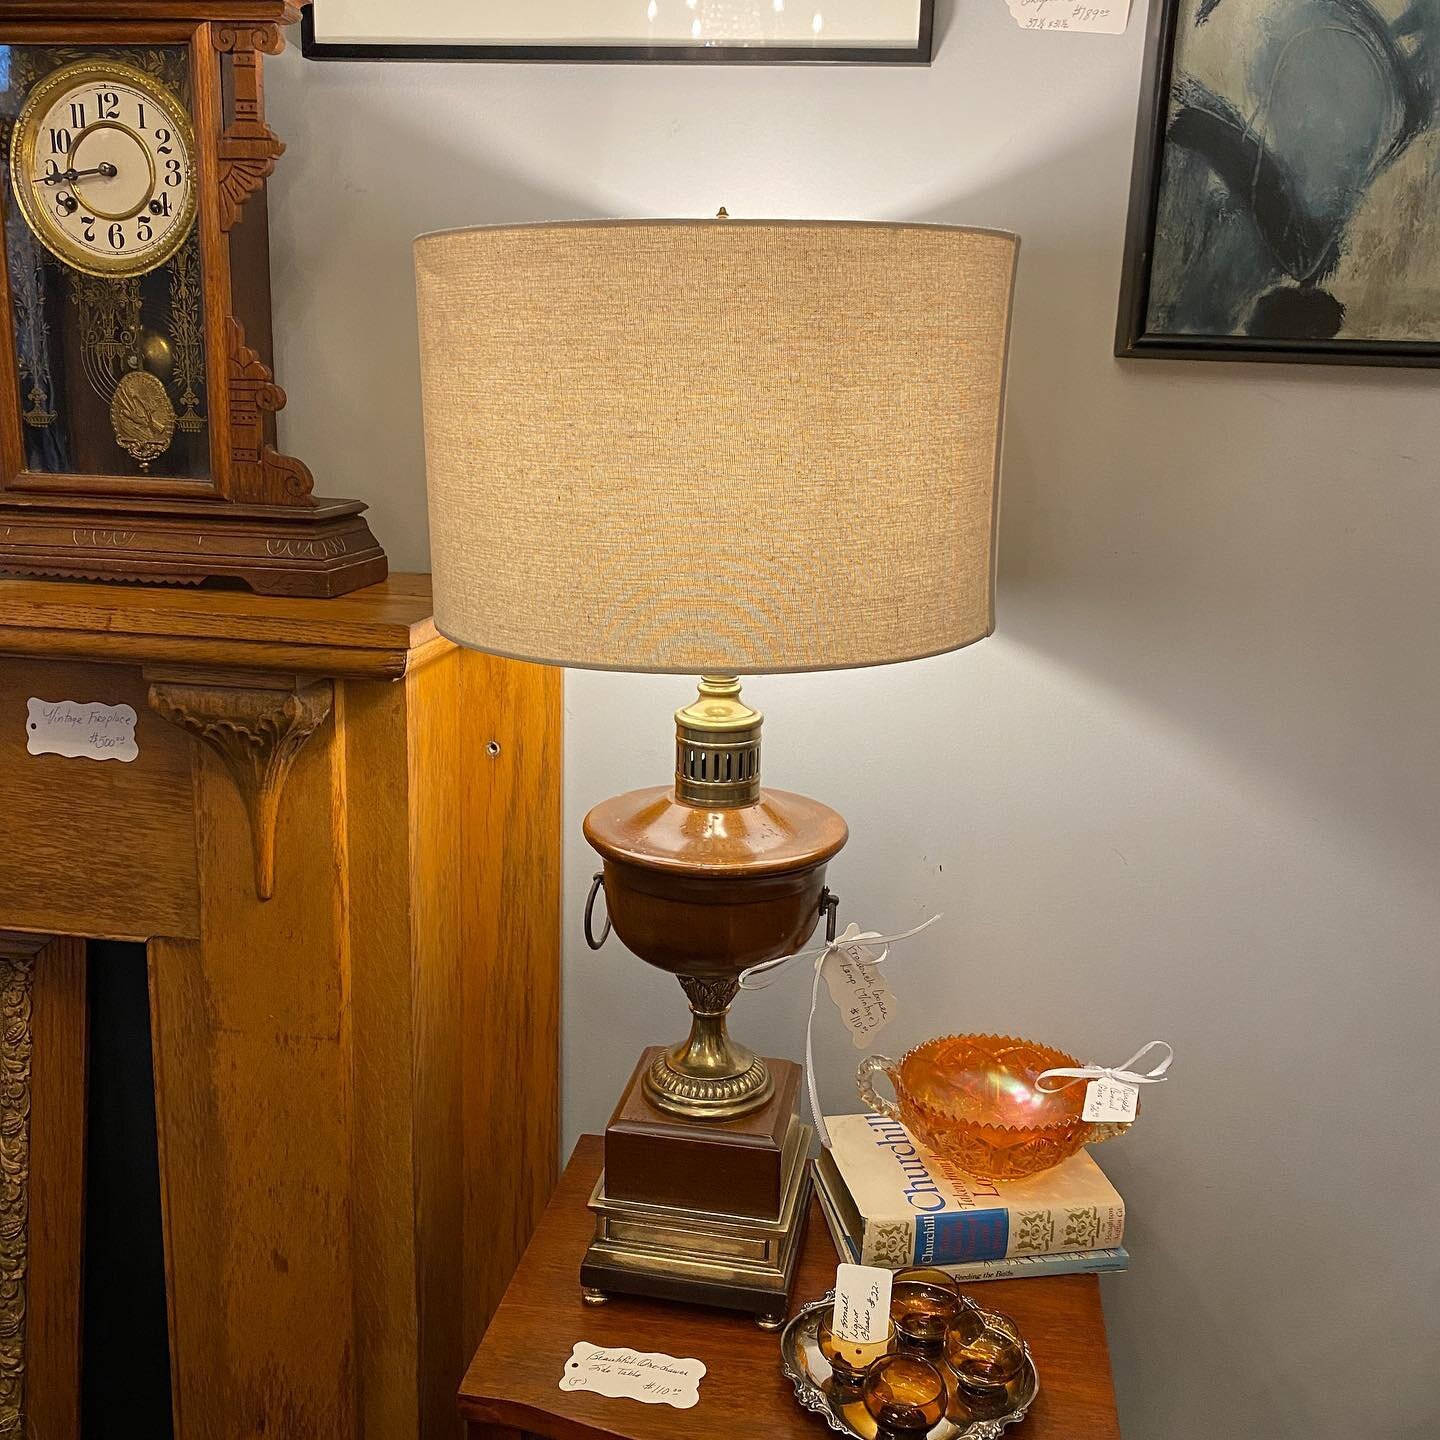 Add a Cool Vintage Lamp and Change Up Your Lighting